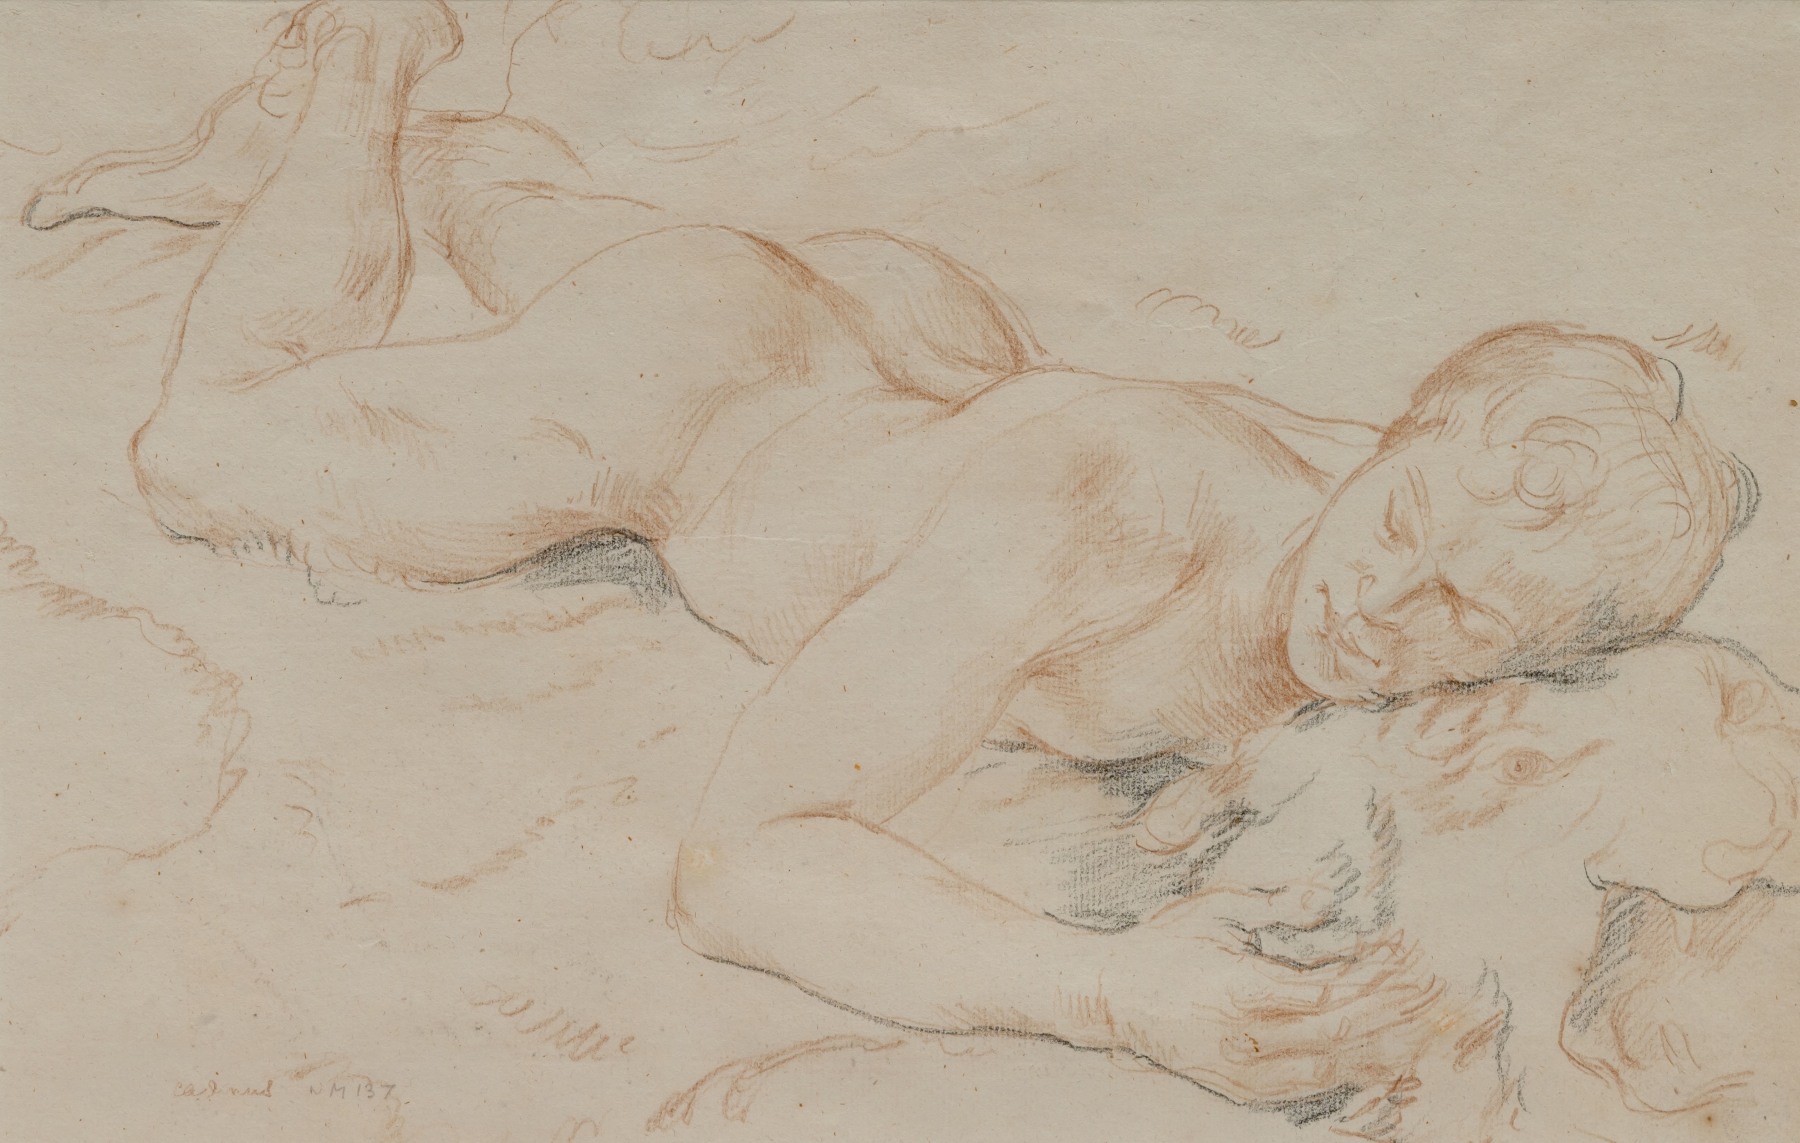 Reclining Nude NM137, c. 1974, Crayon on paper